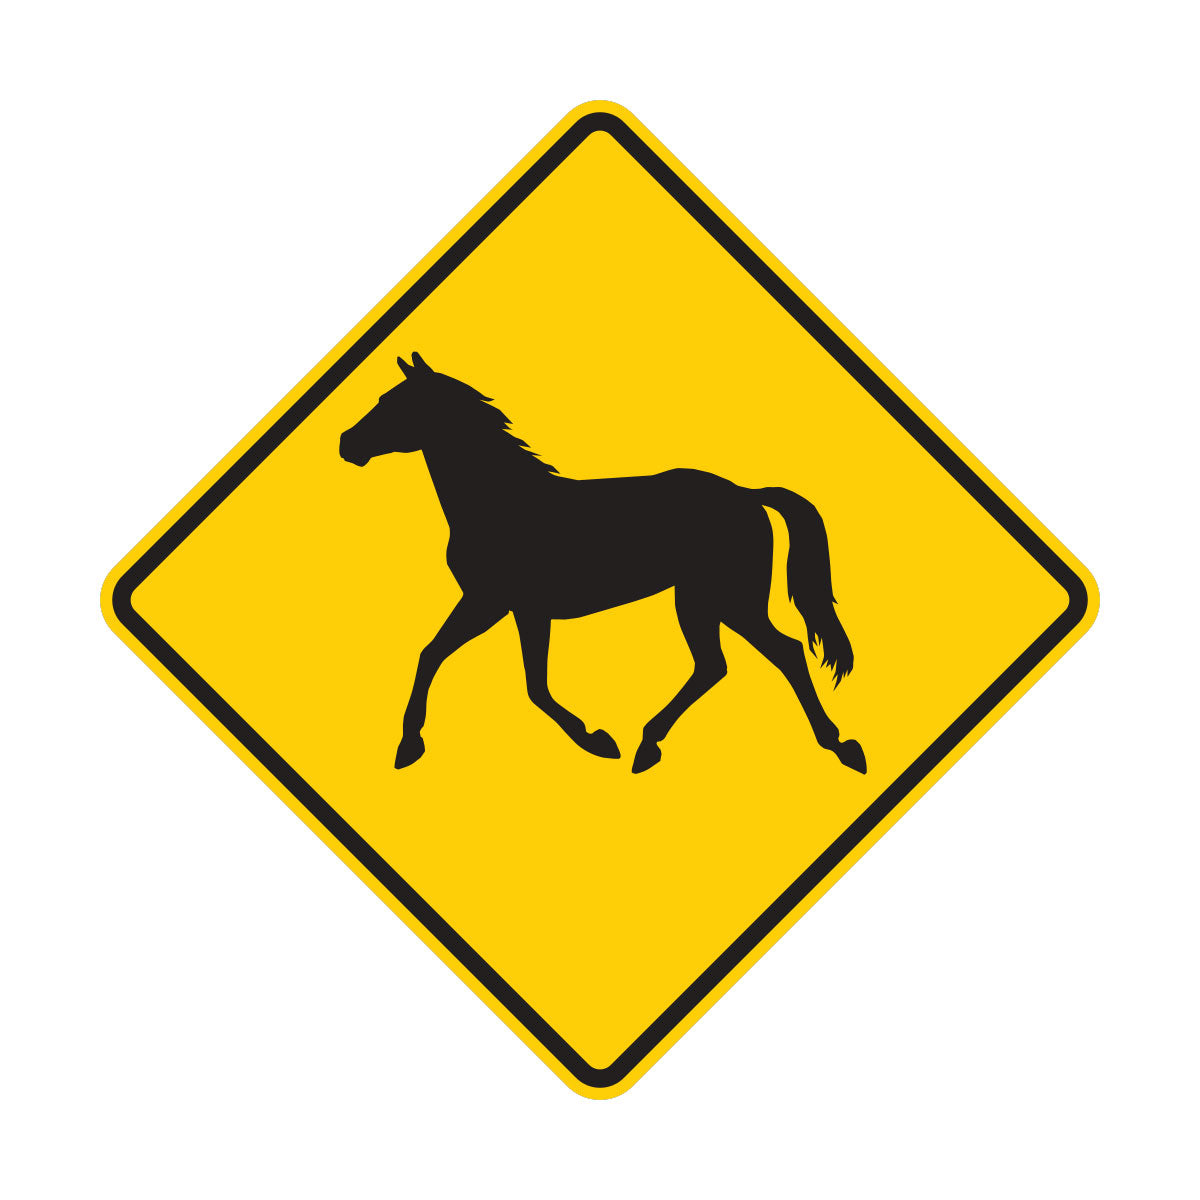 Wild Horse Crossing Sign (W11-22)